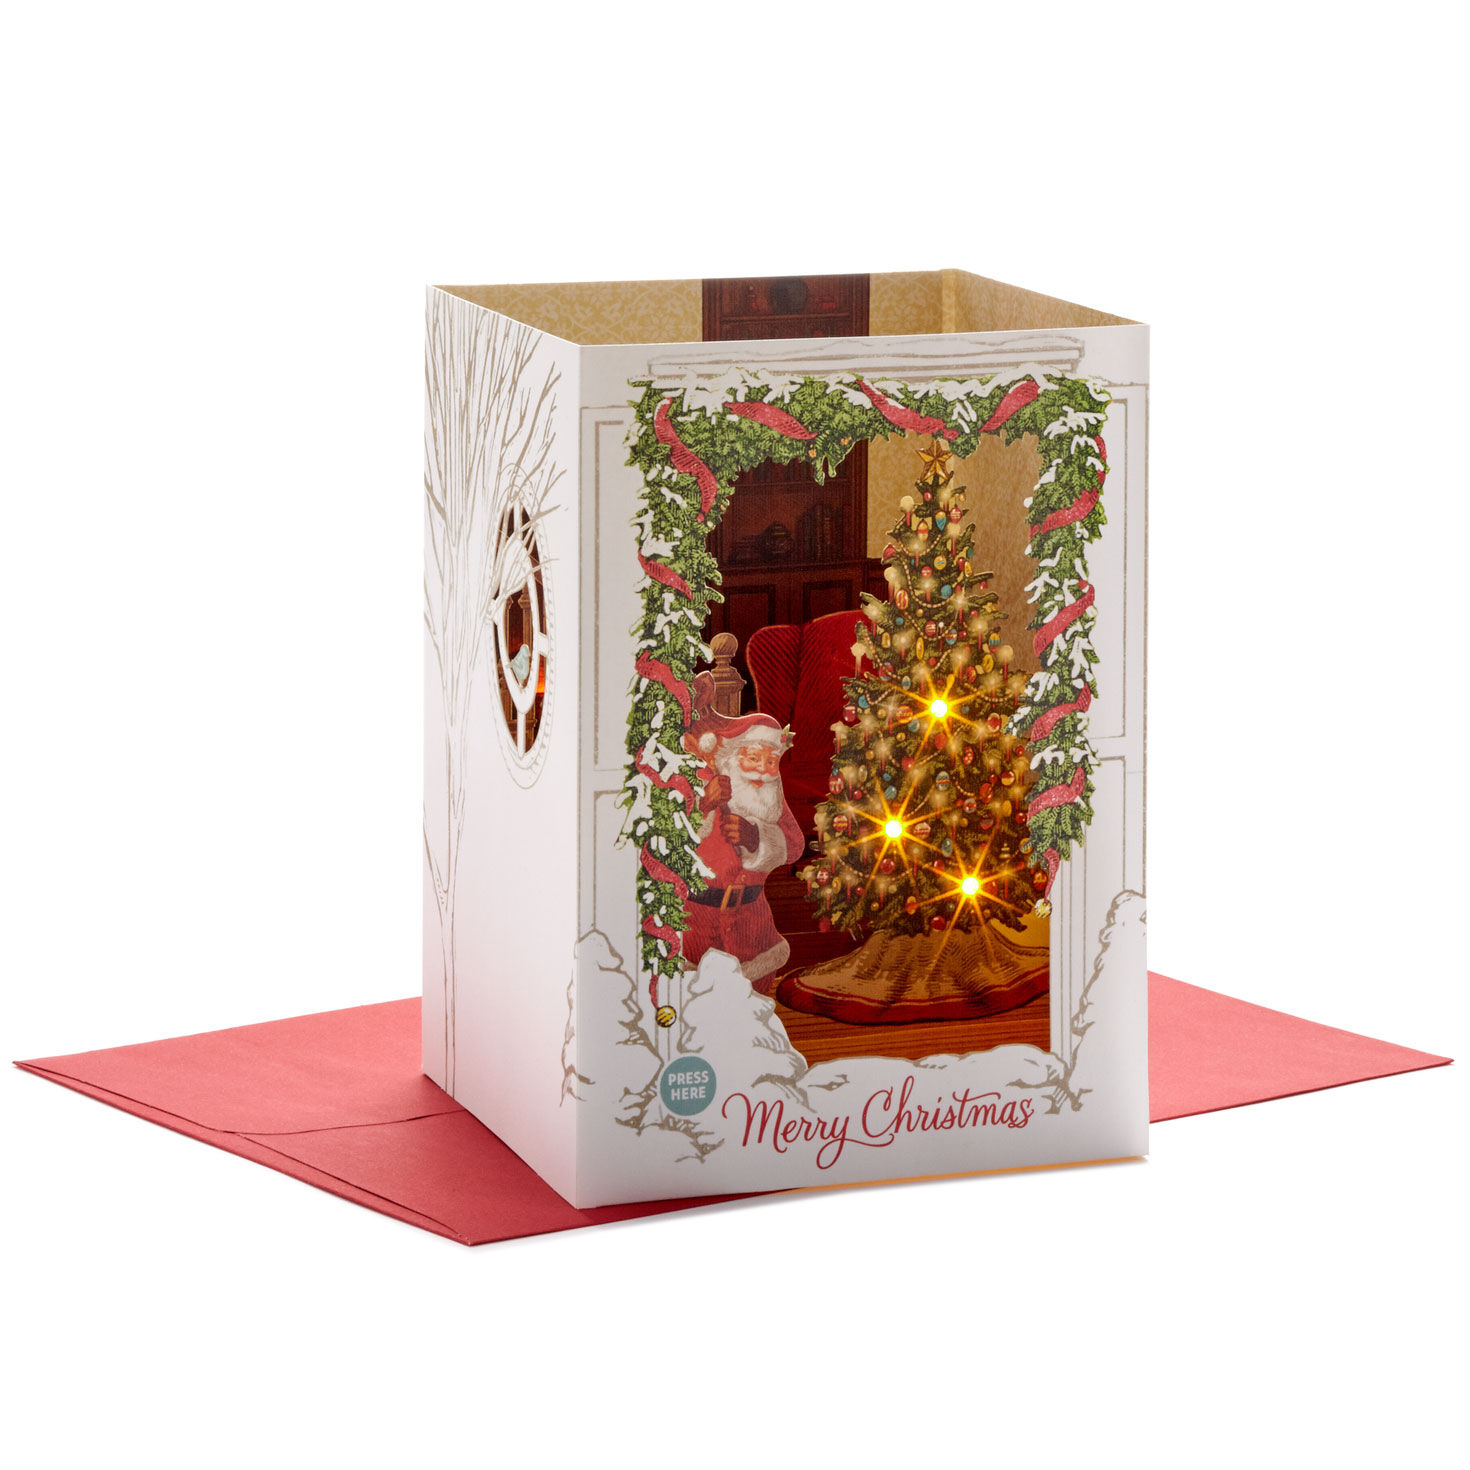 3D Merry Christmas Pop Up Greeting Cards Thank You Gift Set of 4 with Envelopes 